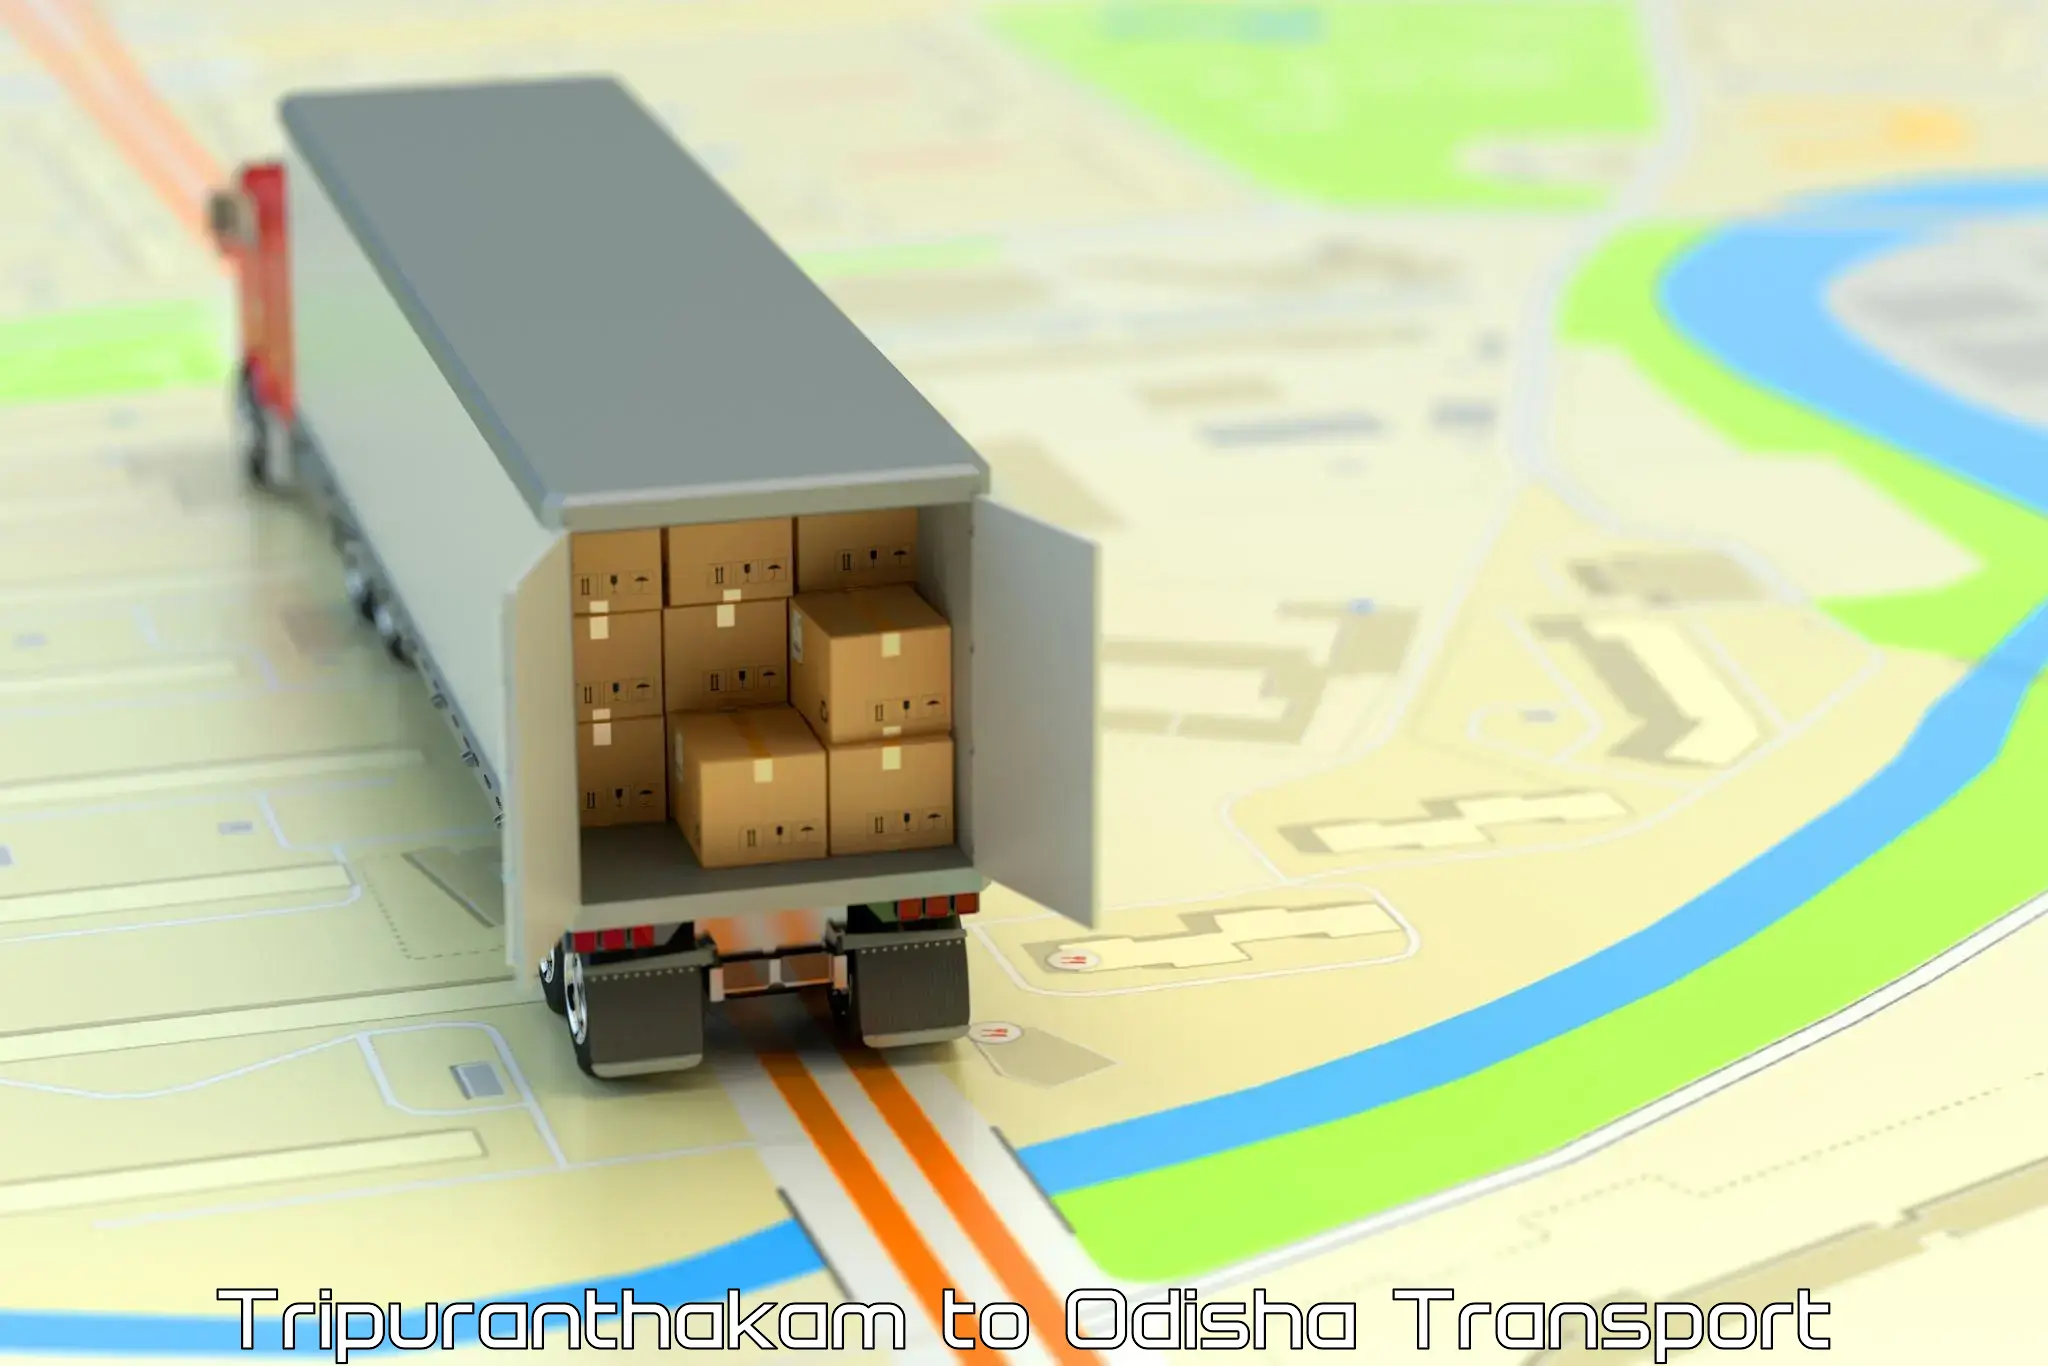 Container transport service Tripuranthakam to Swampatna